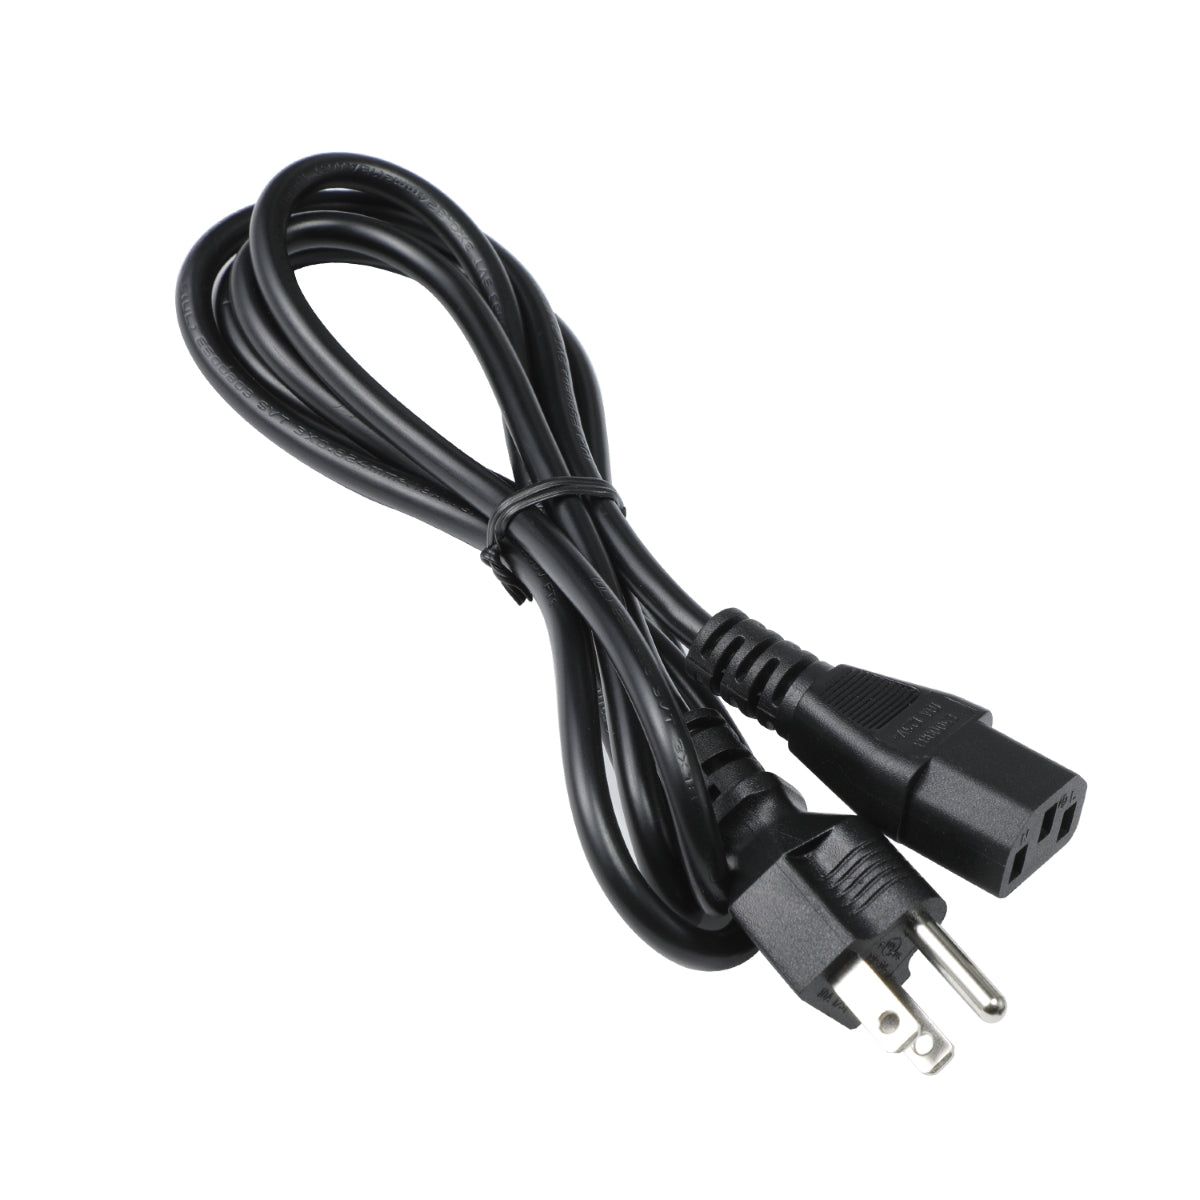 Power Cord for ViewSonic TD2220 Monitor